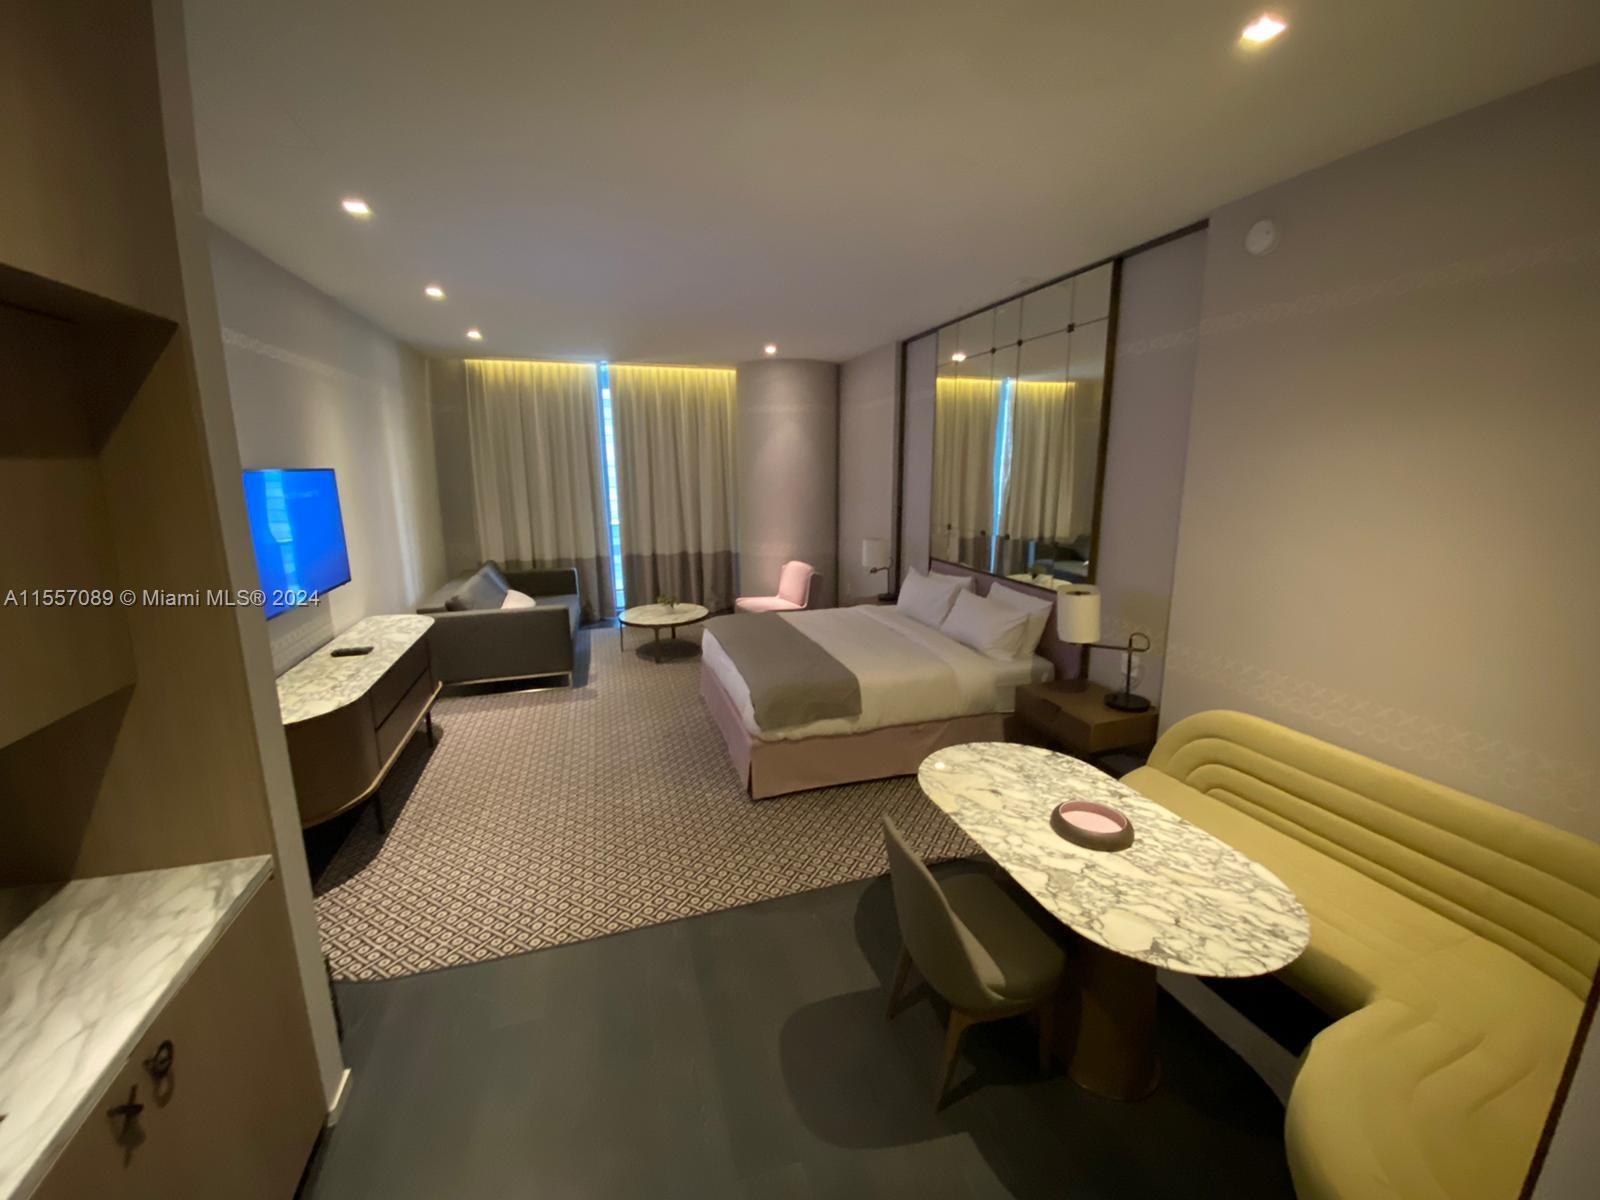 NO CURRENT CONTRACT WITH HOTEL! Unique opportunity to manage your own unit or have it managed by a third party. avg daily rental in hotel website is 417$/night. Best building in Brickell to have a short term vacation property. easy to handle, great returns. high end property.